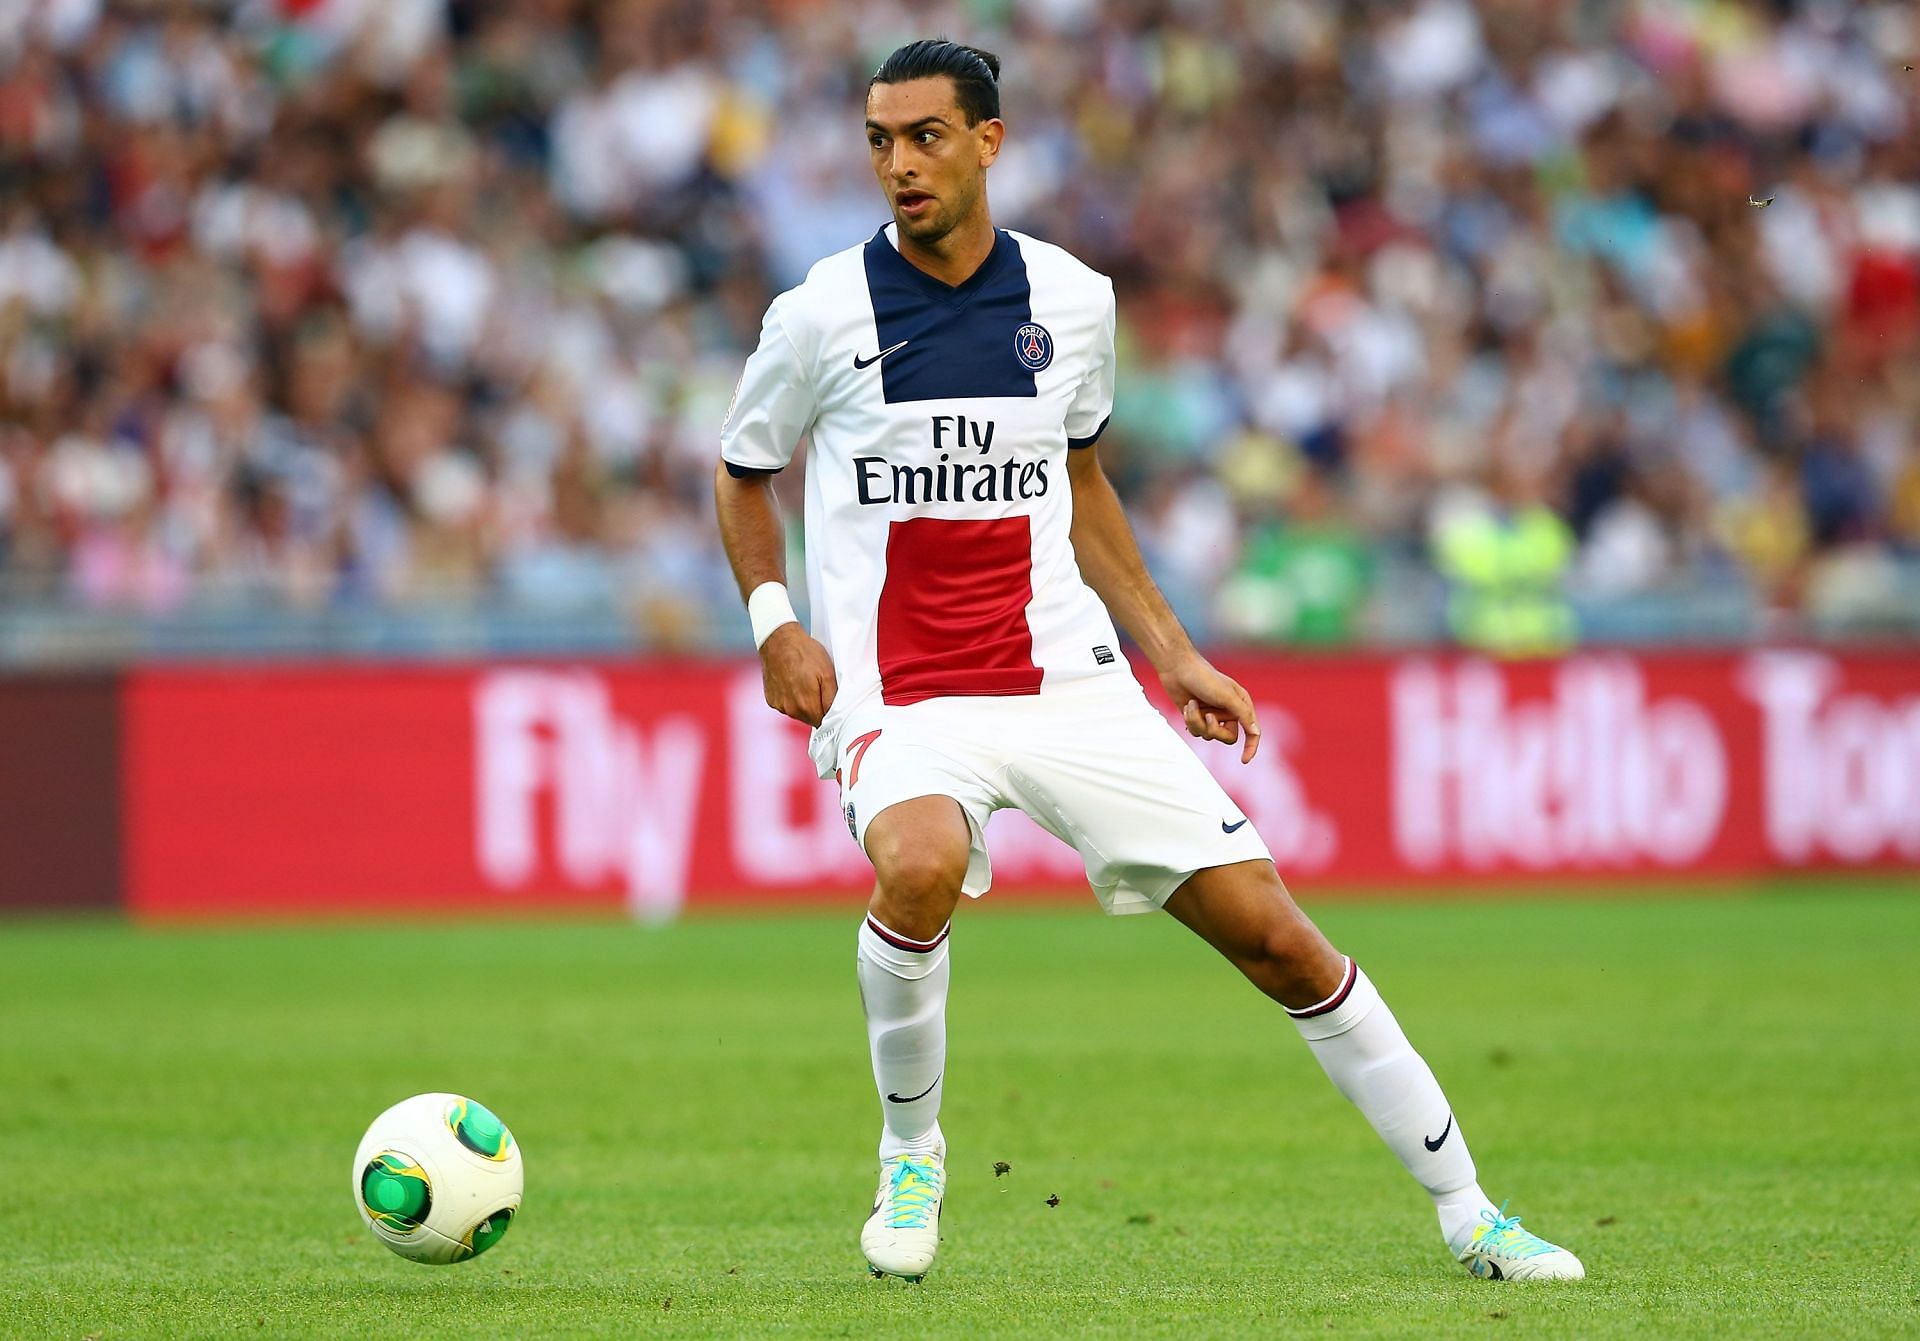 Pastore failed to live up to his billing